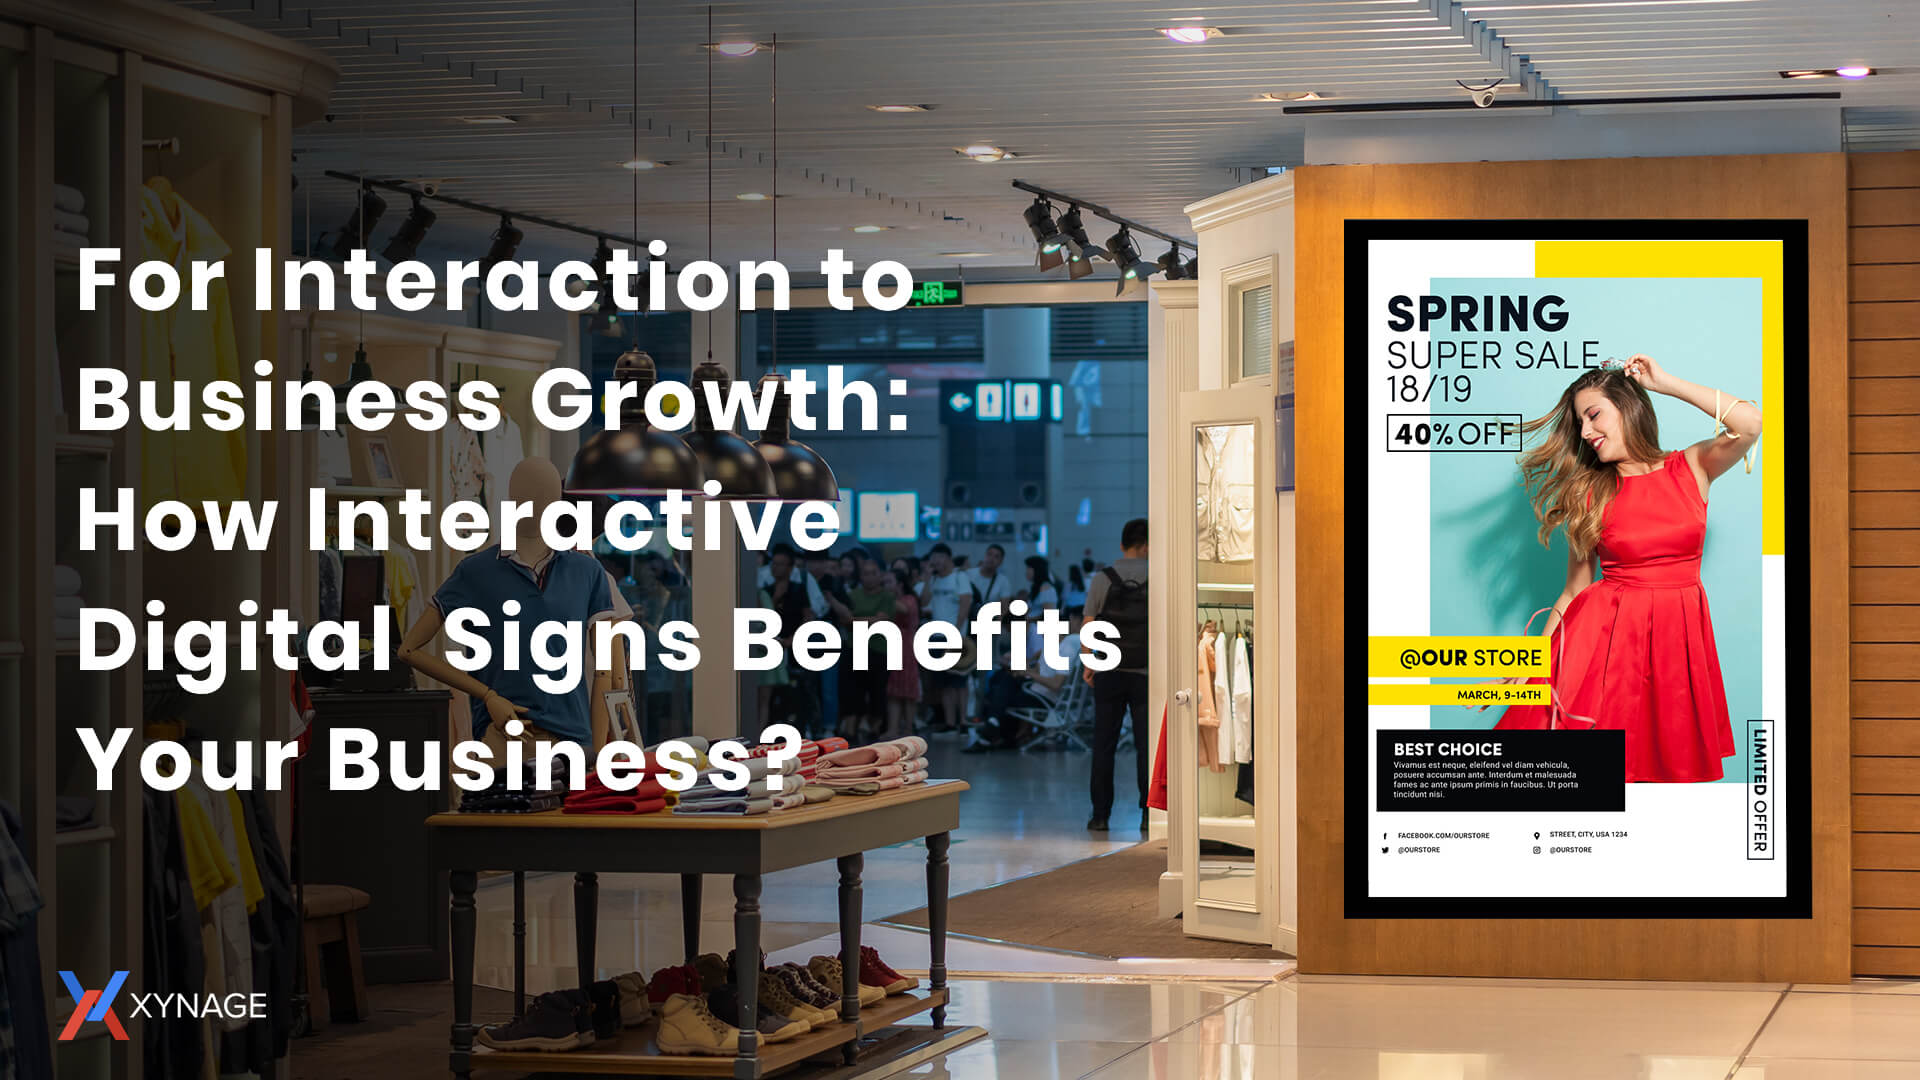 For Interaction to Business Growth: How Interactive Digital Signs Benefits Your Business?